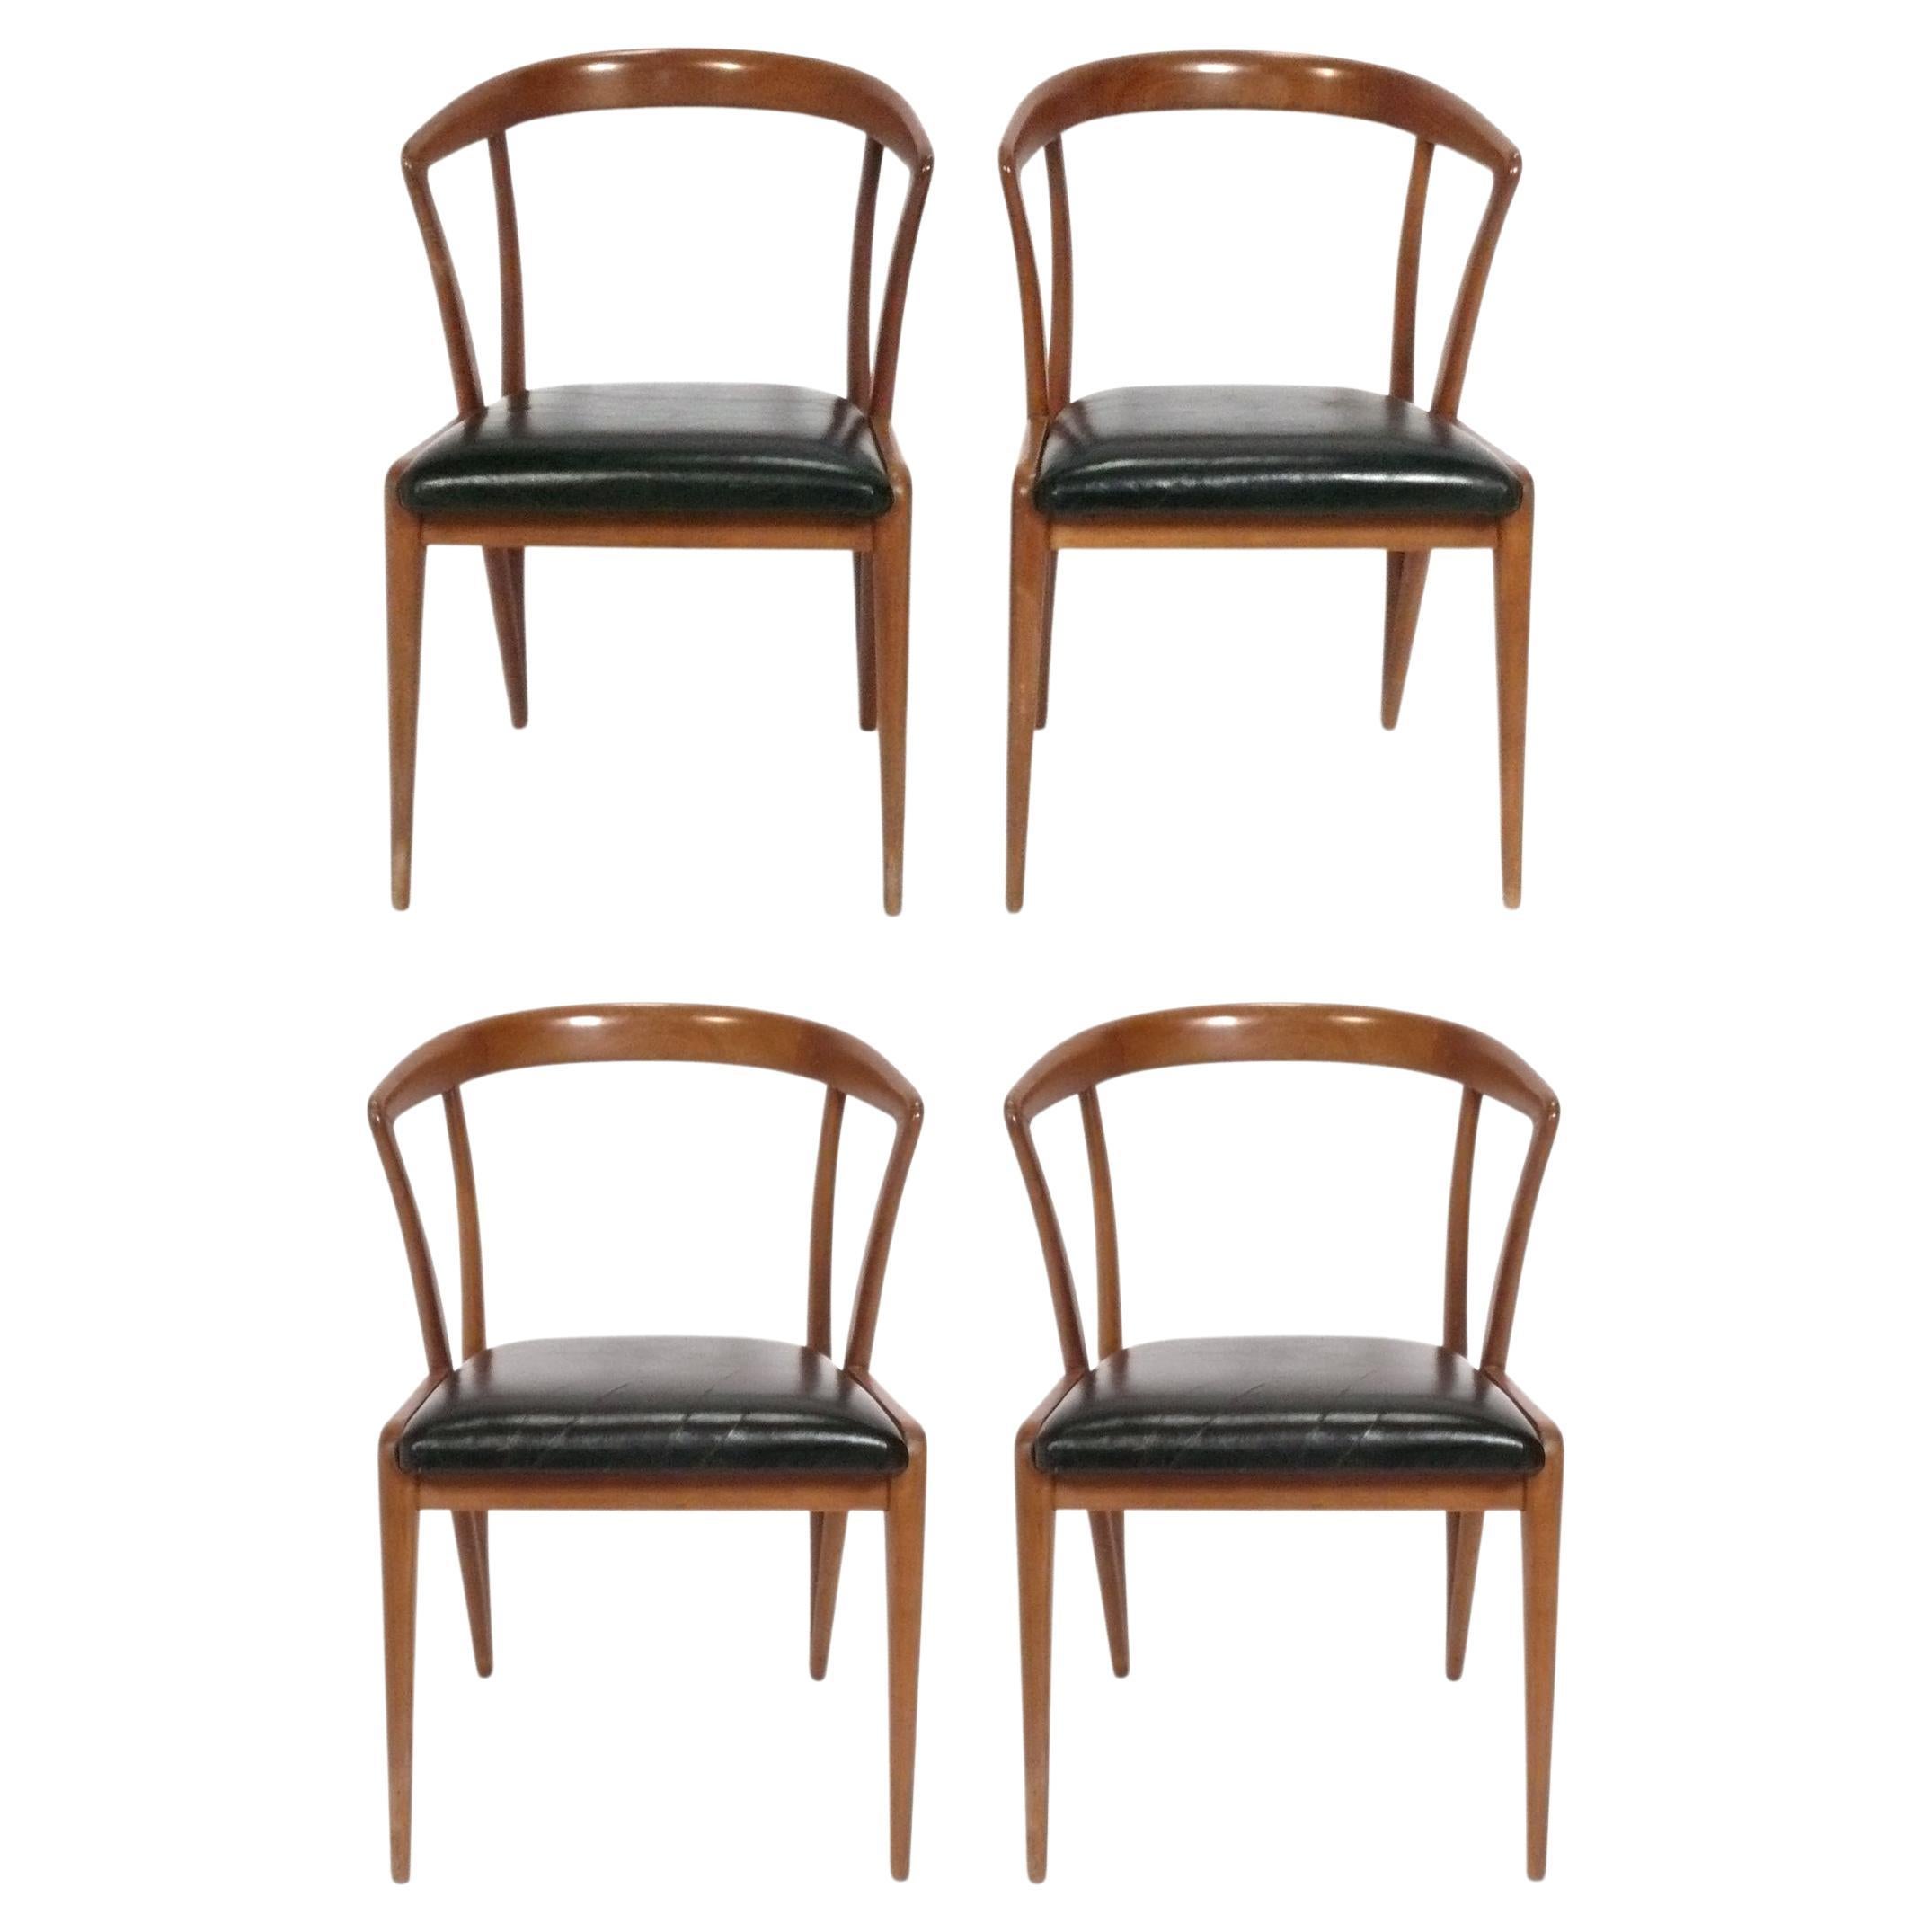 Sculptural Walnut Dining Chairs Designed by Bertha Schaeffer for Singer and Sons For Sale